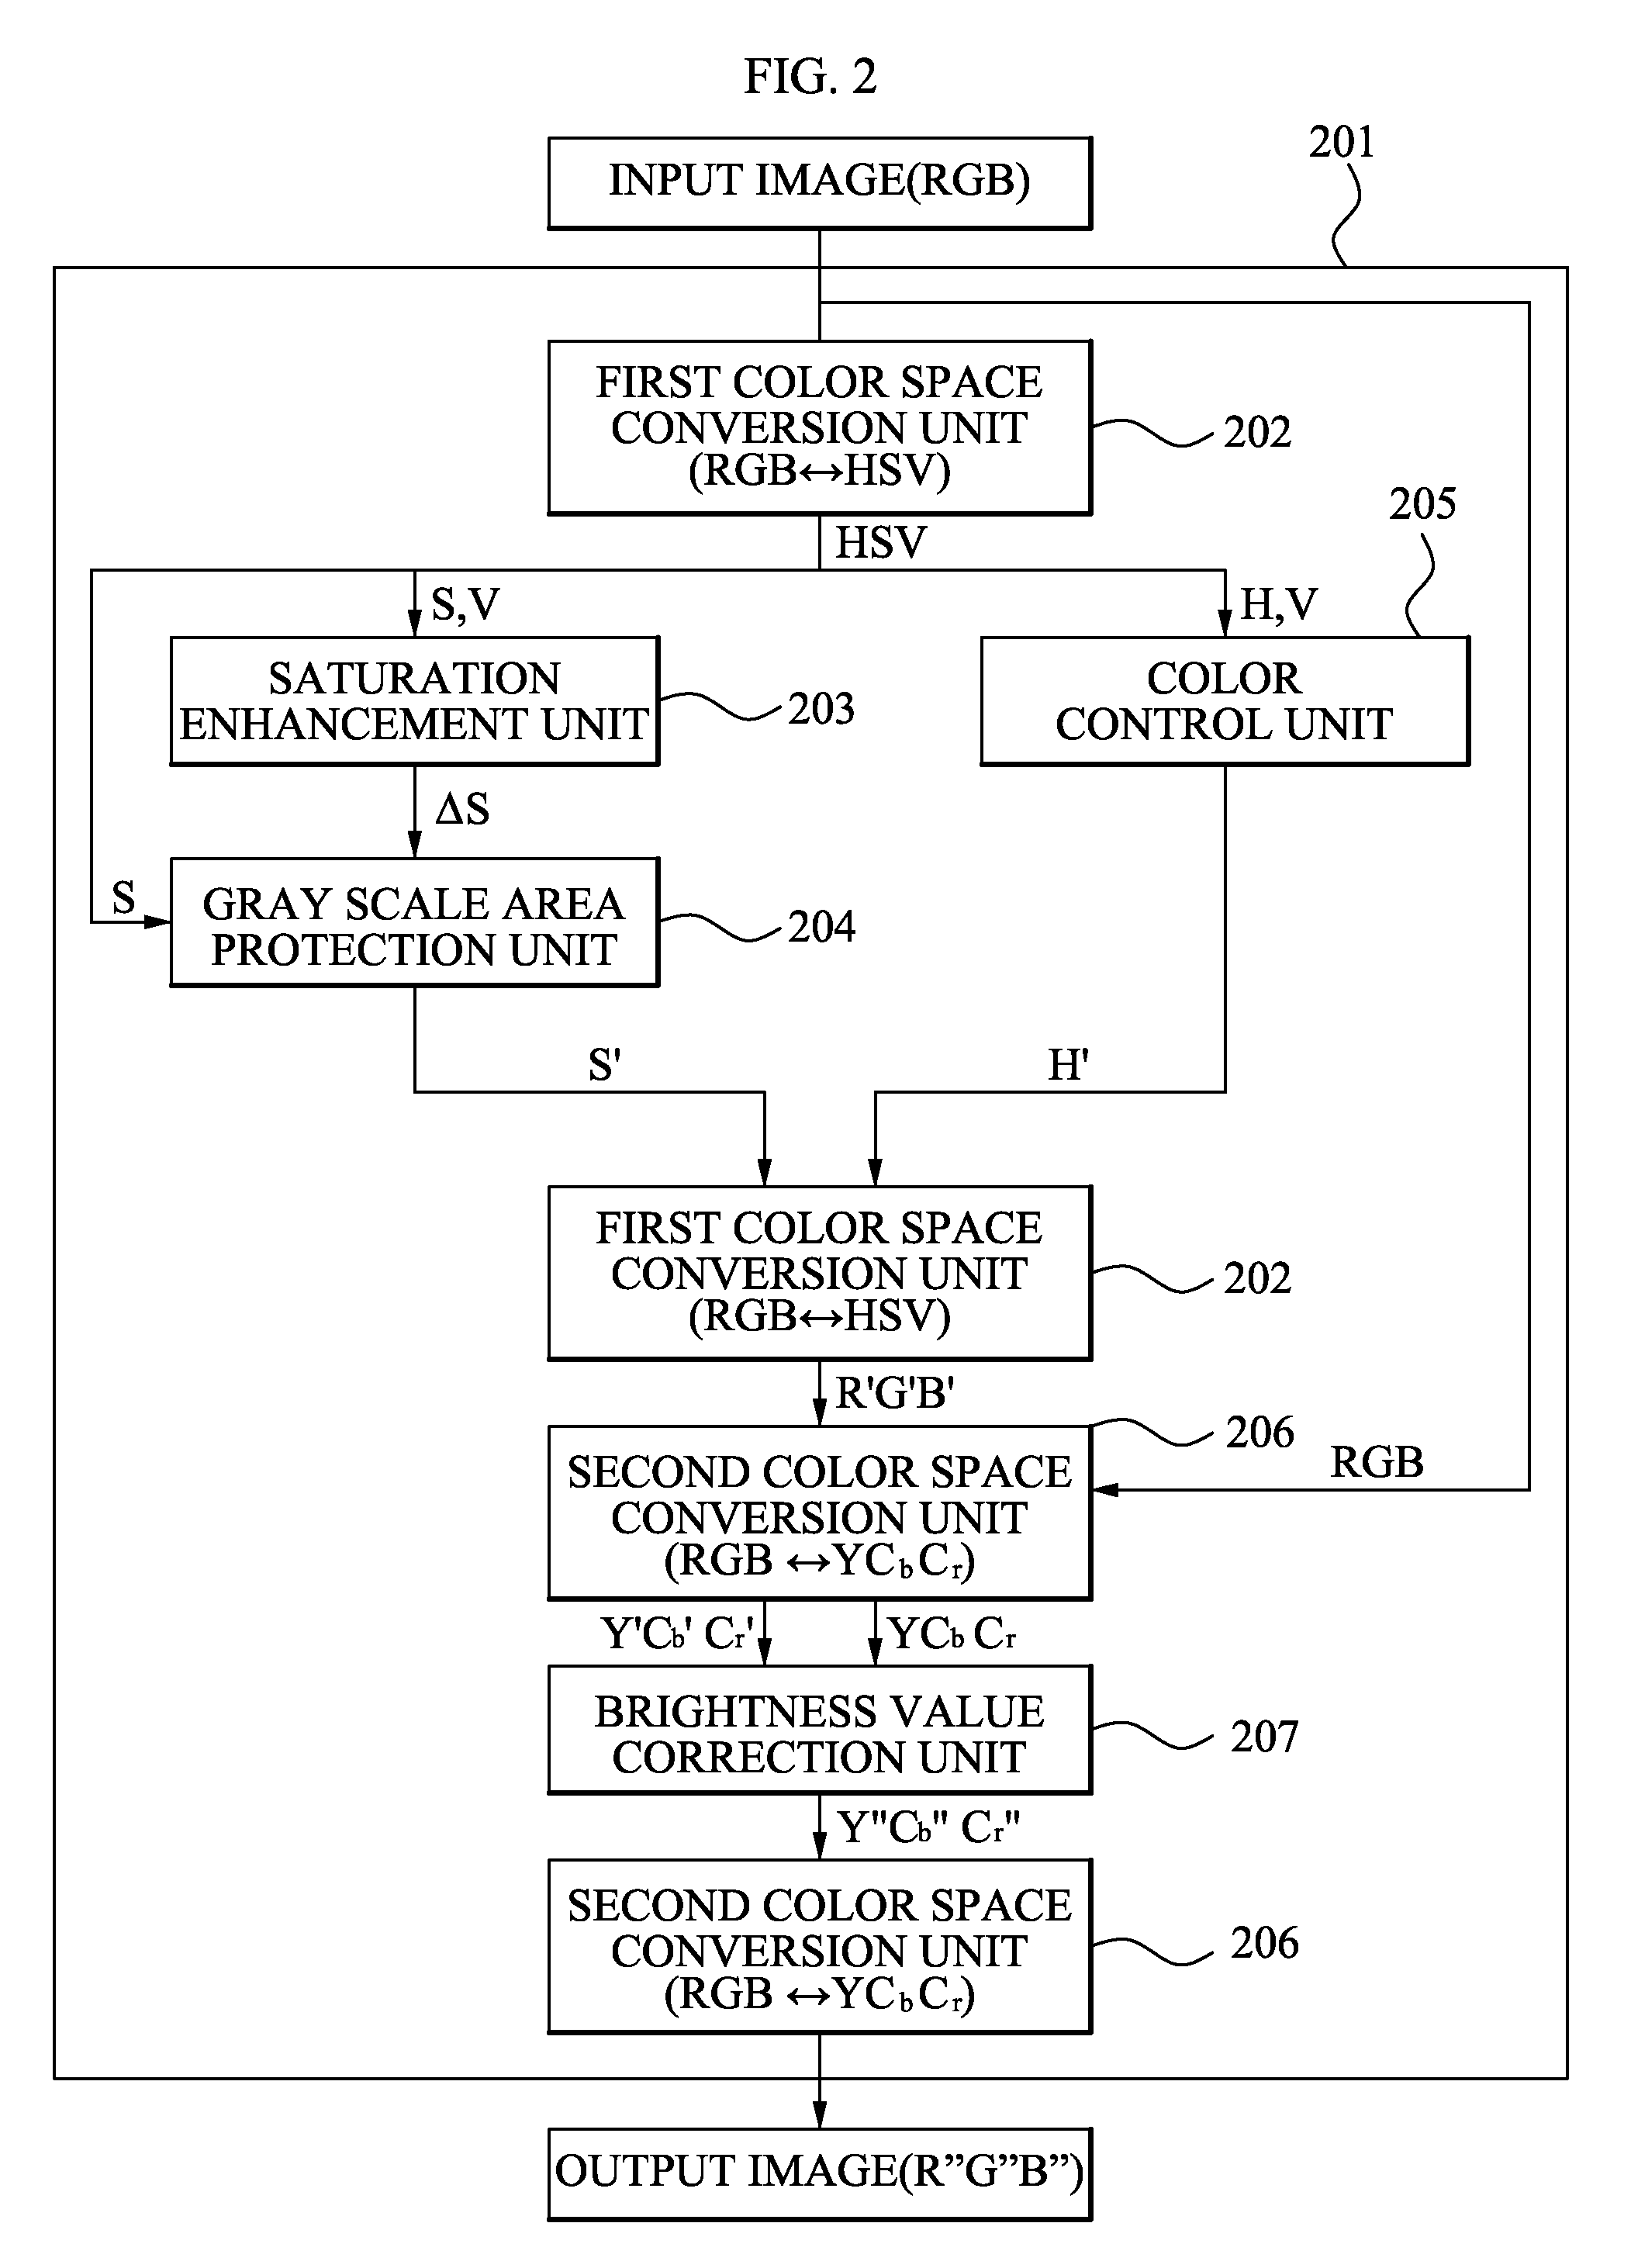 Apparatus and method of enhancing color of image